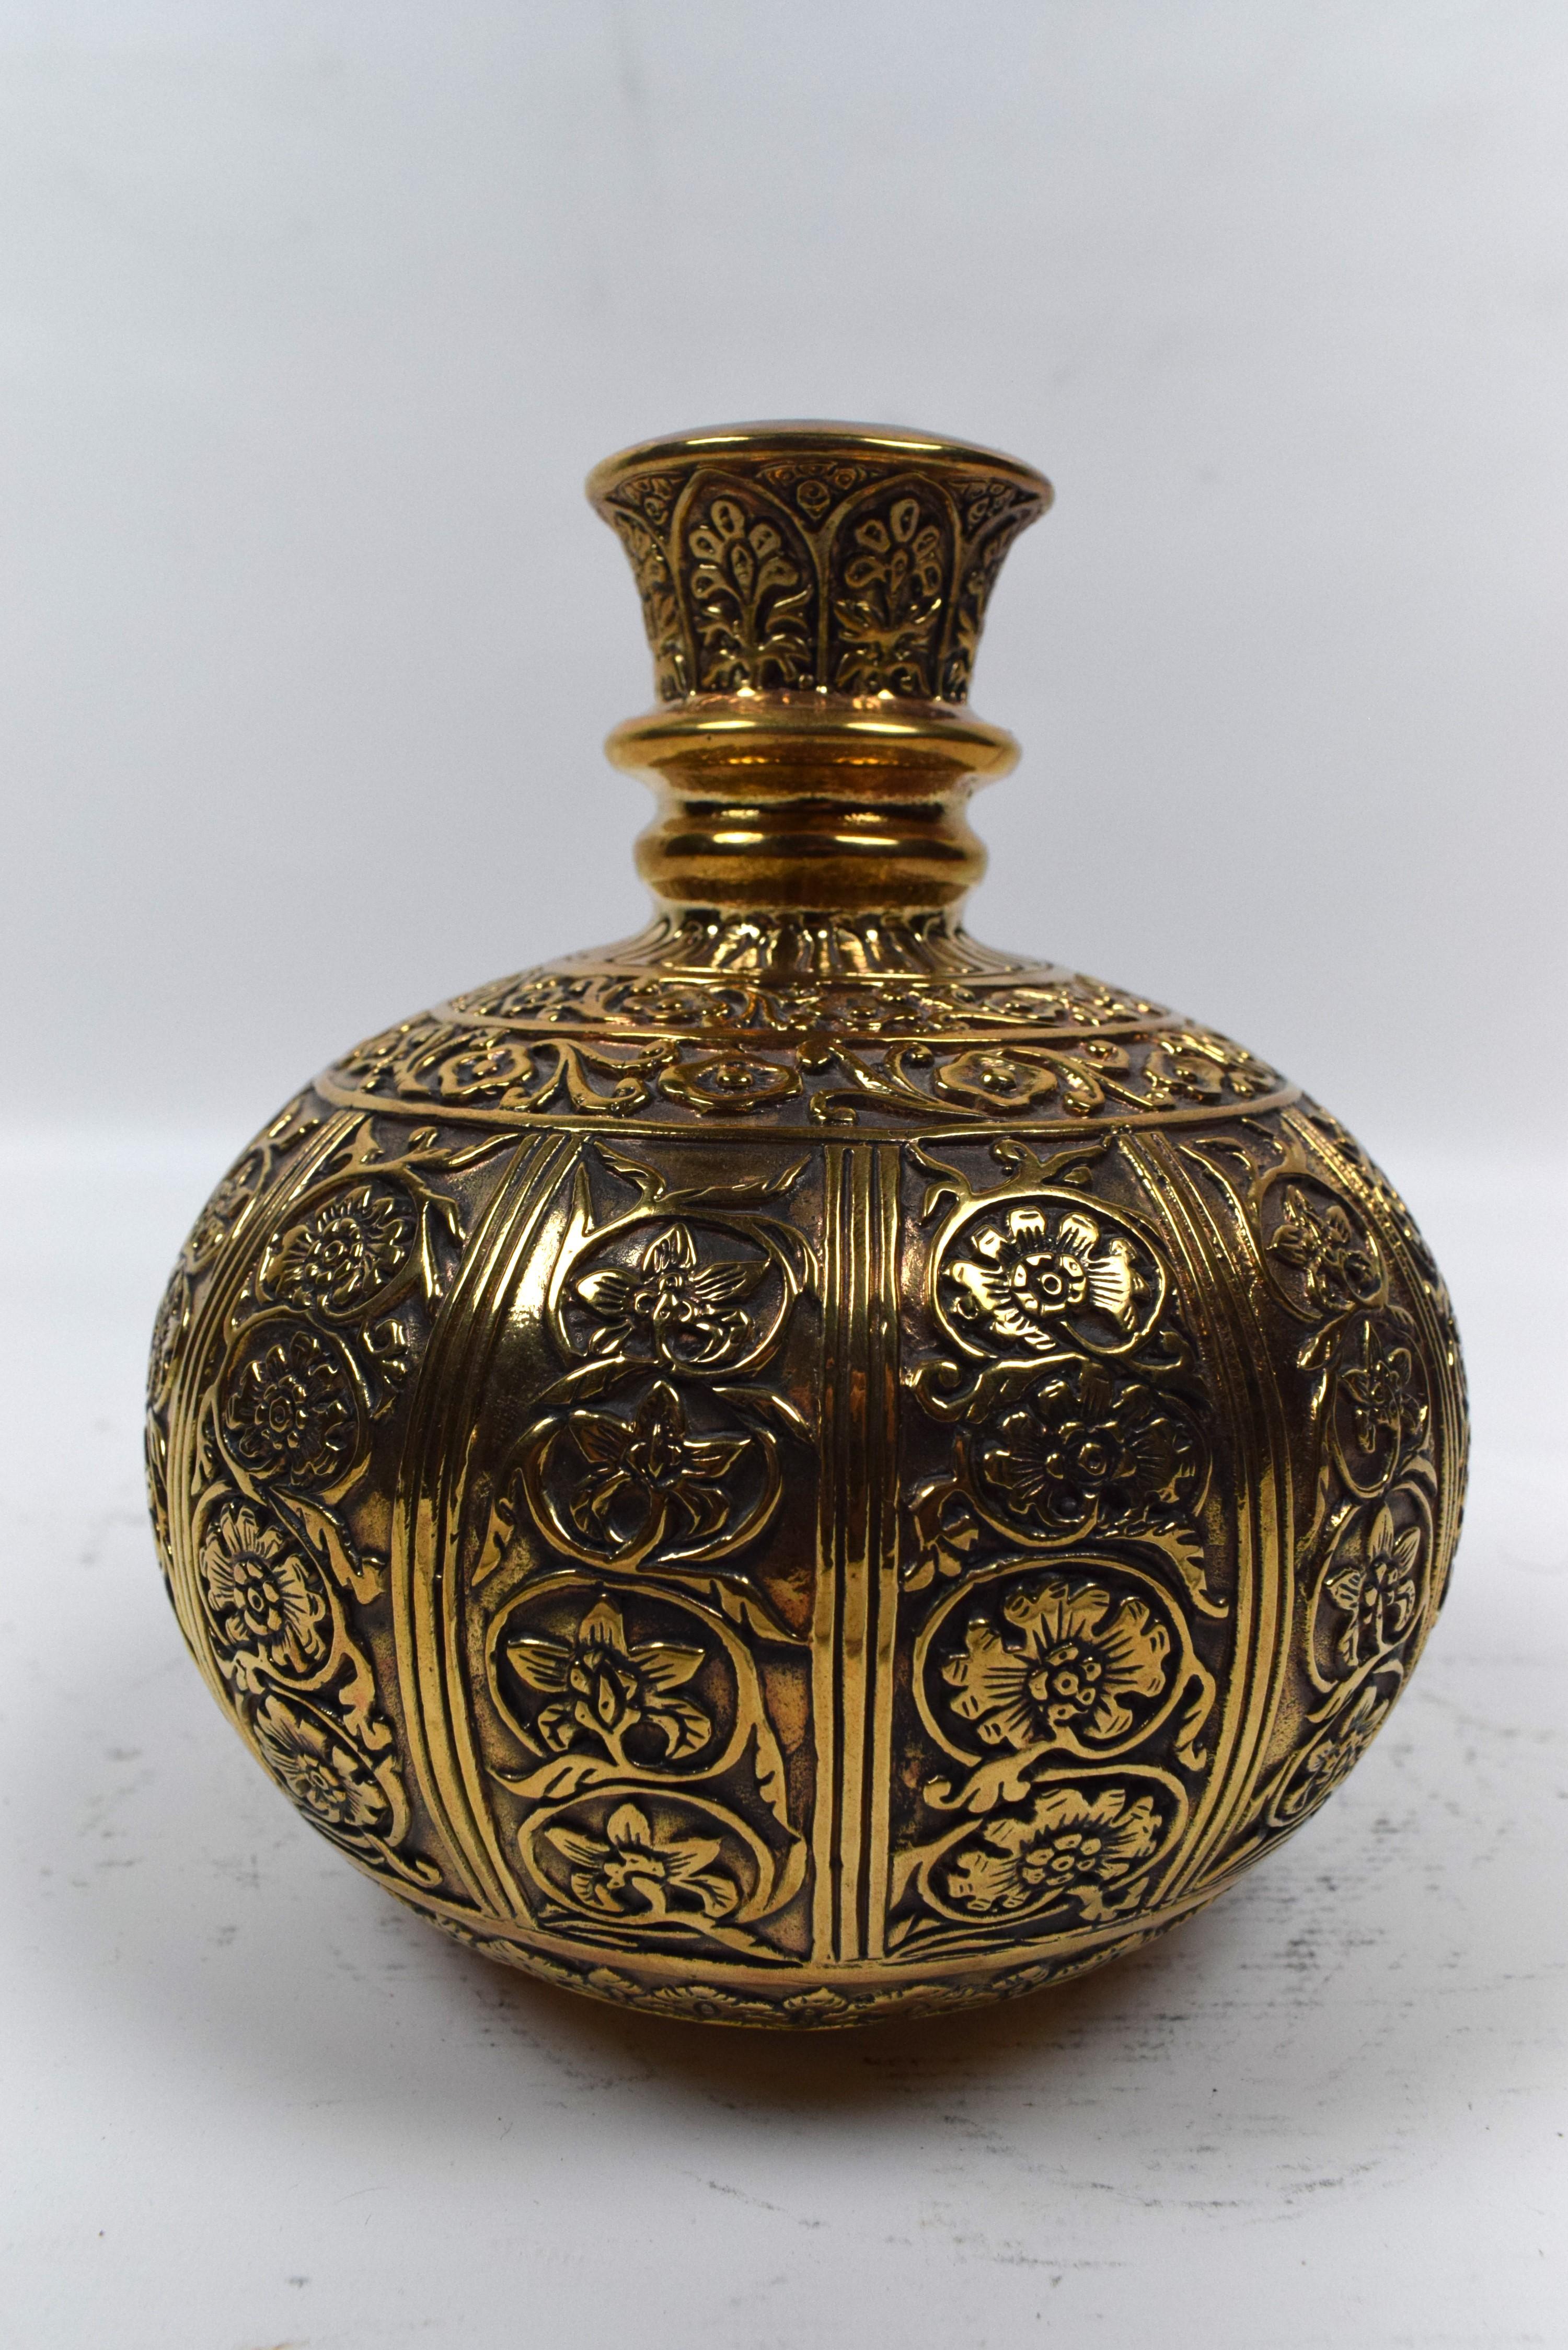 The brass Mughal hookah features a beautifully engraved brass base adorned with intricate floral and  geometric motifs. The base is a work of art, showcasing the exquisite craftsmanship and attention to detail characteristic of Mughal design.

The